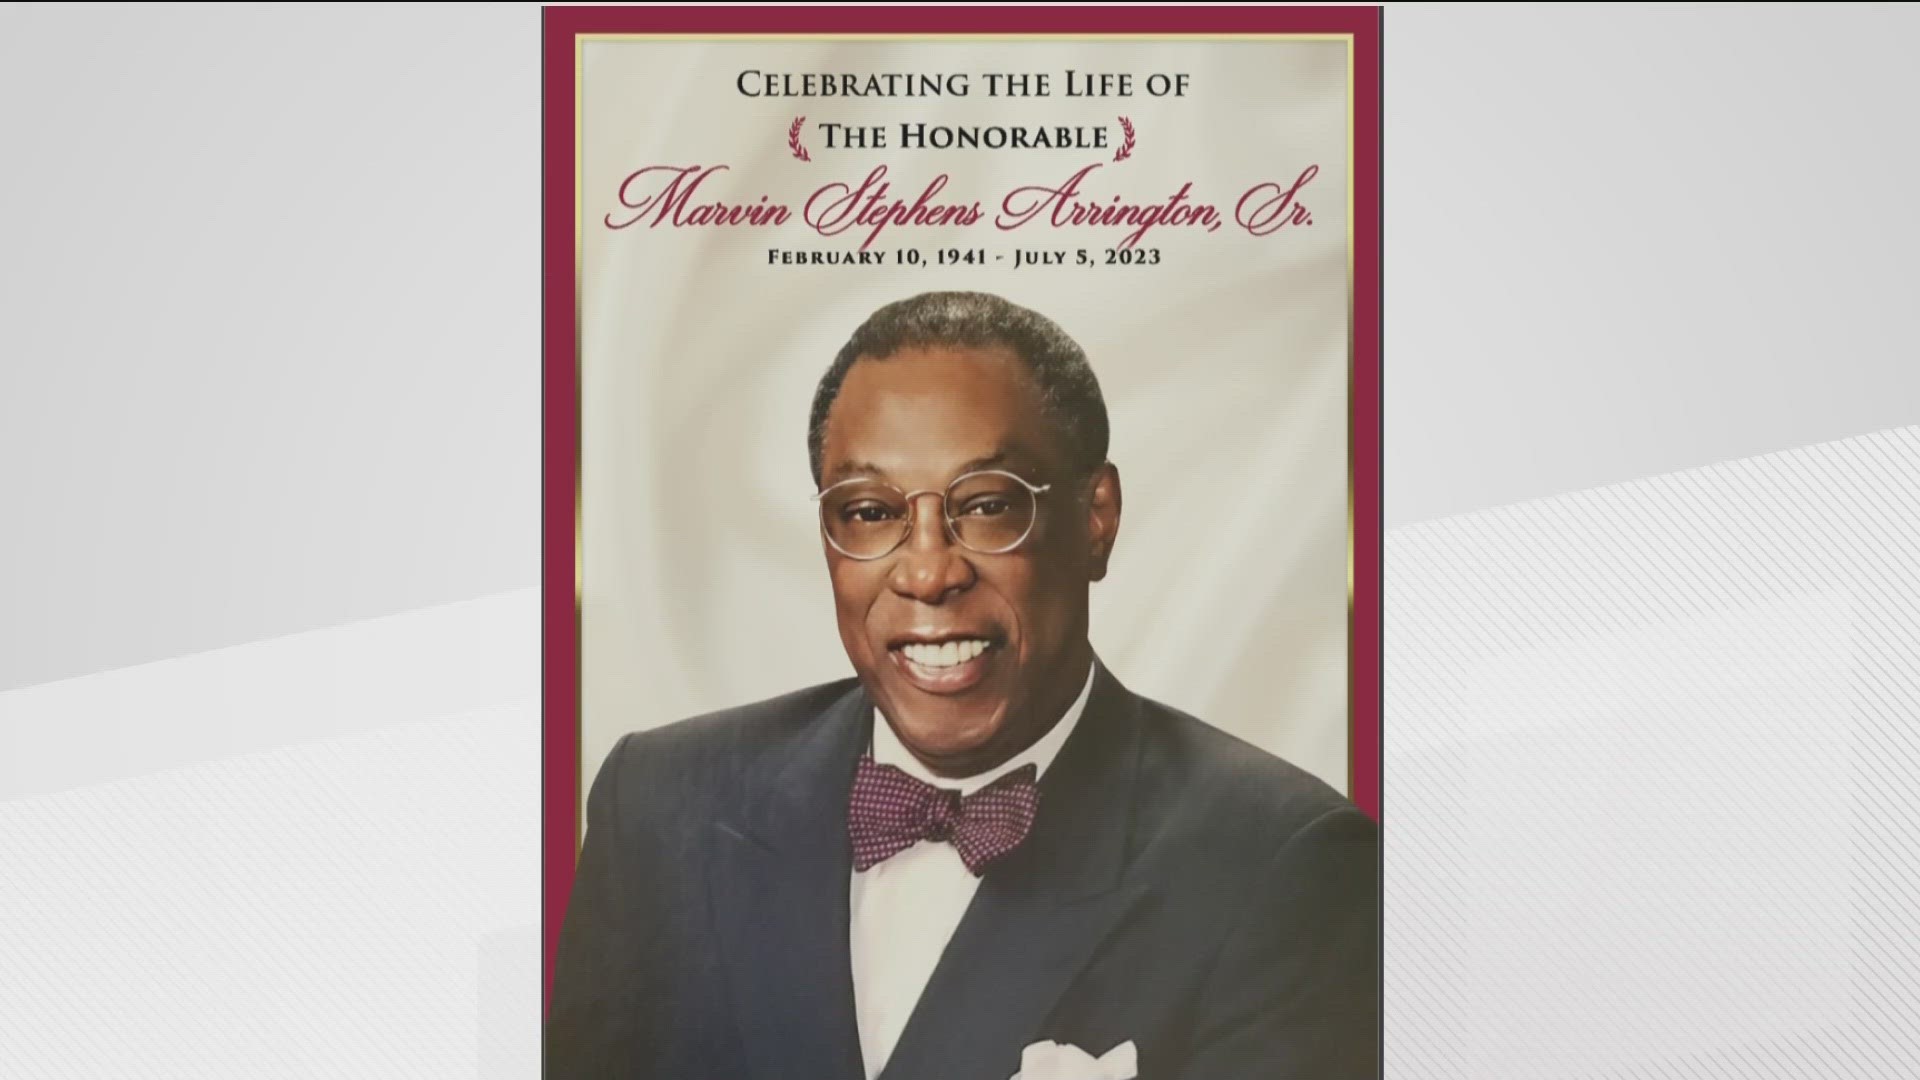 He will lie in state on Thursday at the Atlanta City Hall until 4 p.m.